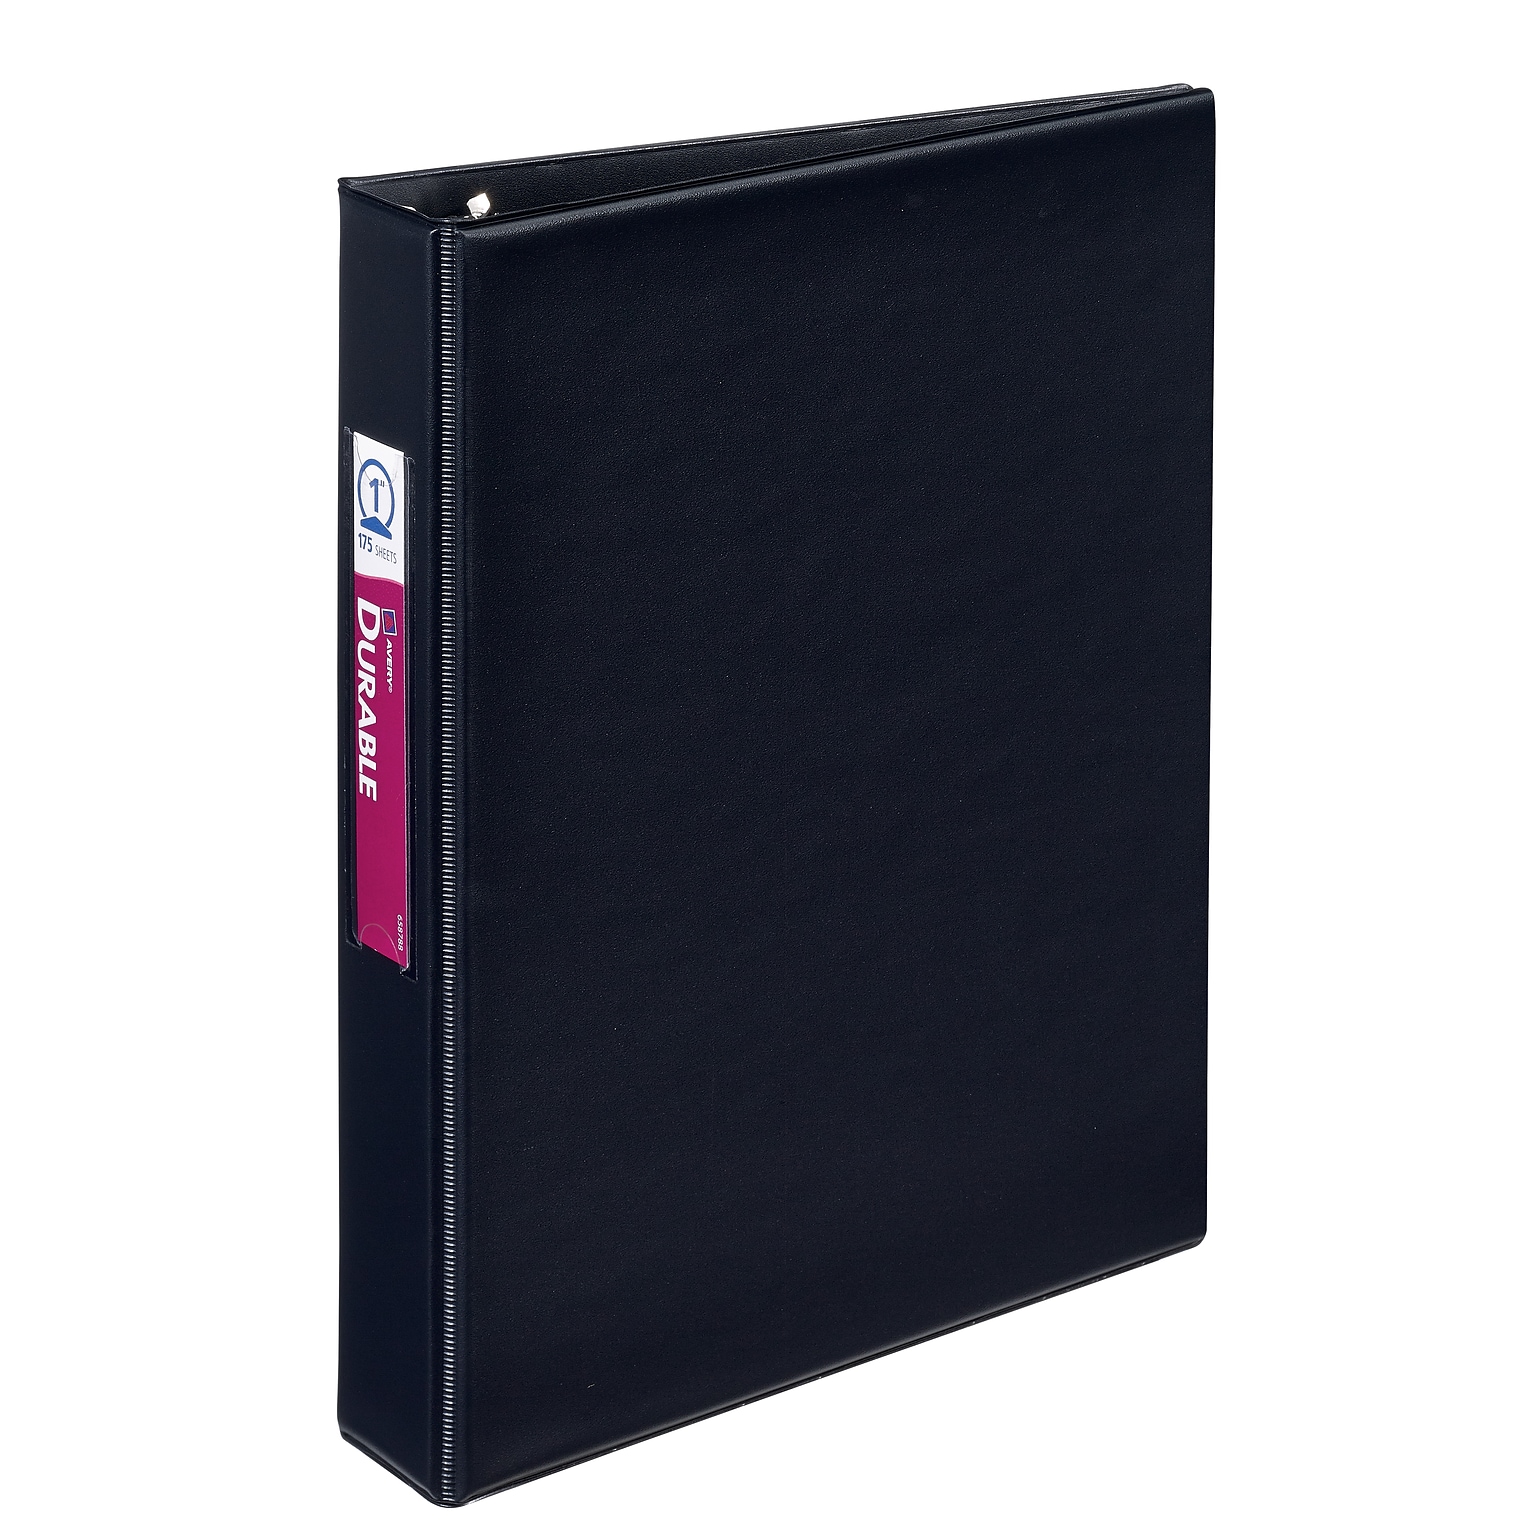 Avery Durable Mini 1 3-Ring Non-View Binders for 5 1/2 x 8 1/2 paper, Round Ring, Black (AVE27257)